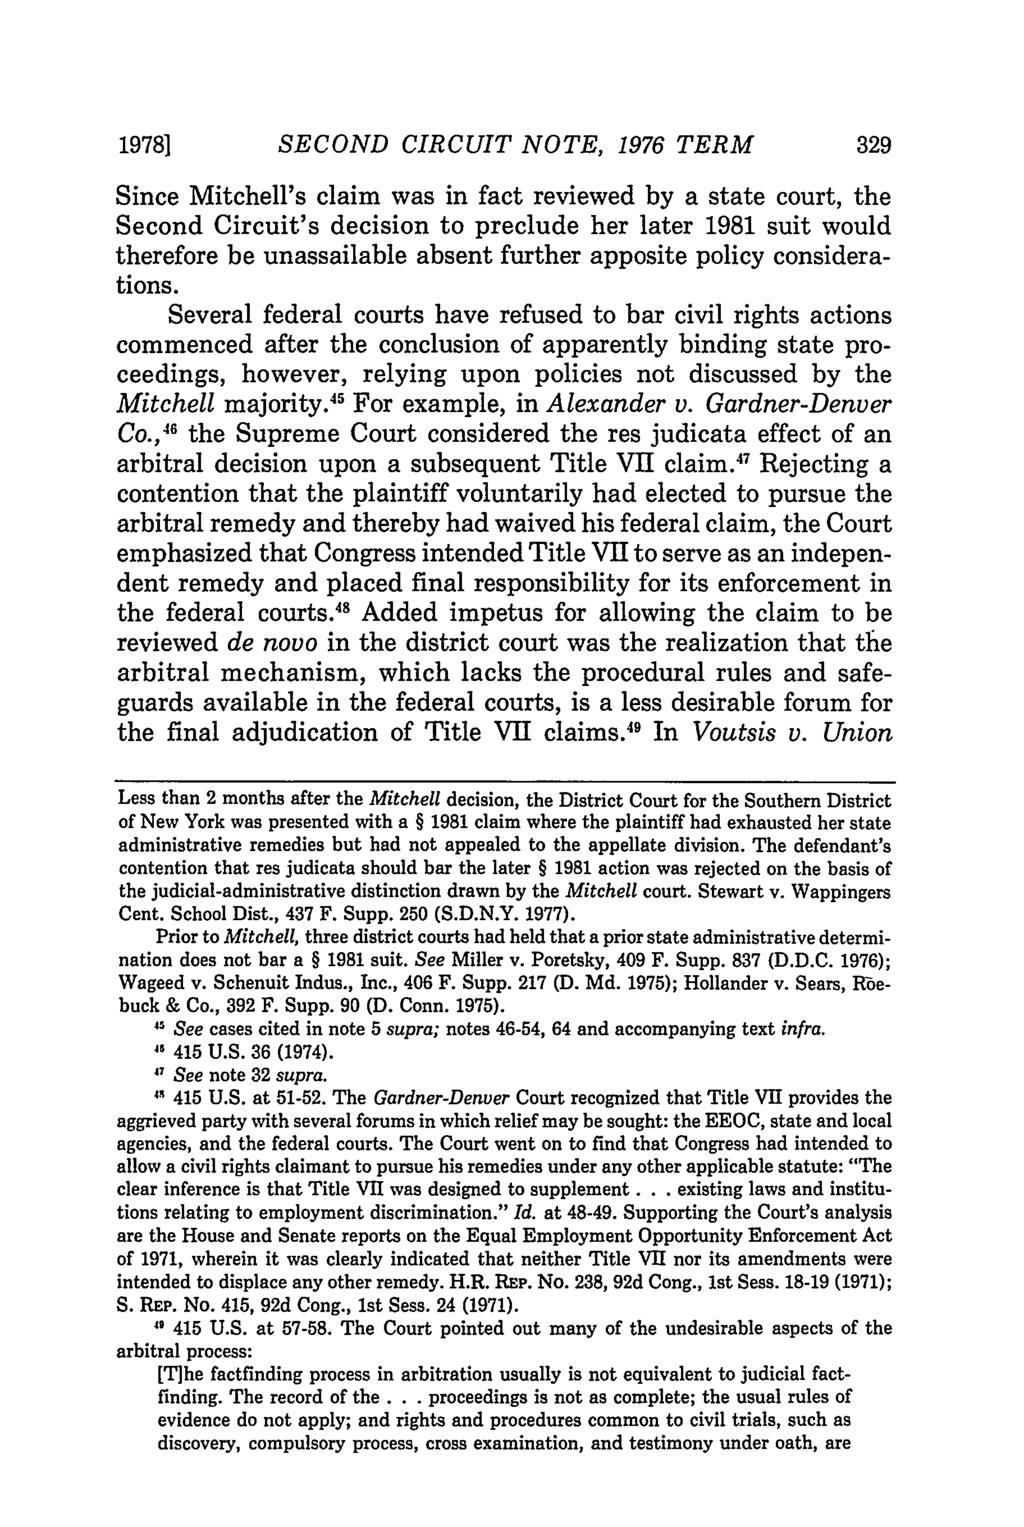 1978] SECOND CIRCUIT NOTE, 1976 TERM Since Mitchell's claim was in fact reviewed by a state court, the Second Circuit's decision to preclude her later 1981 suit would therefore be unassailable absent